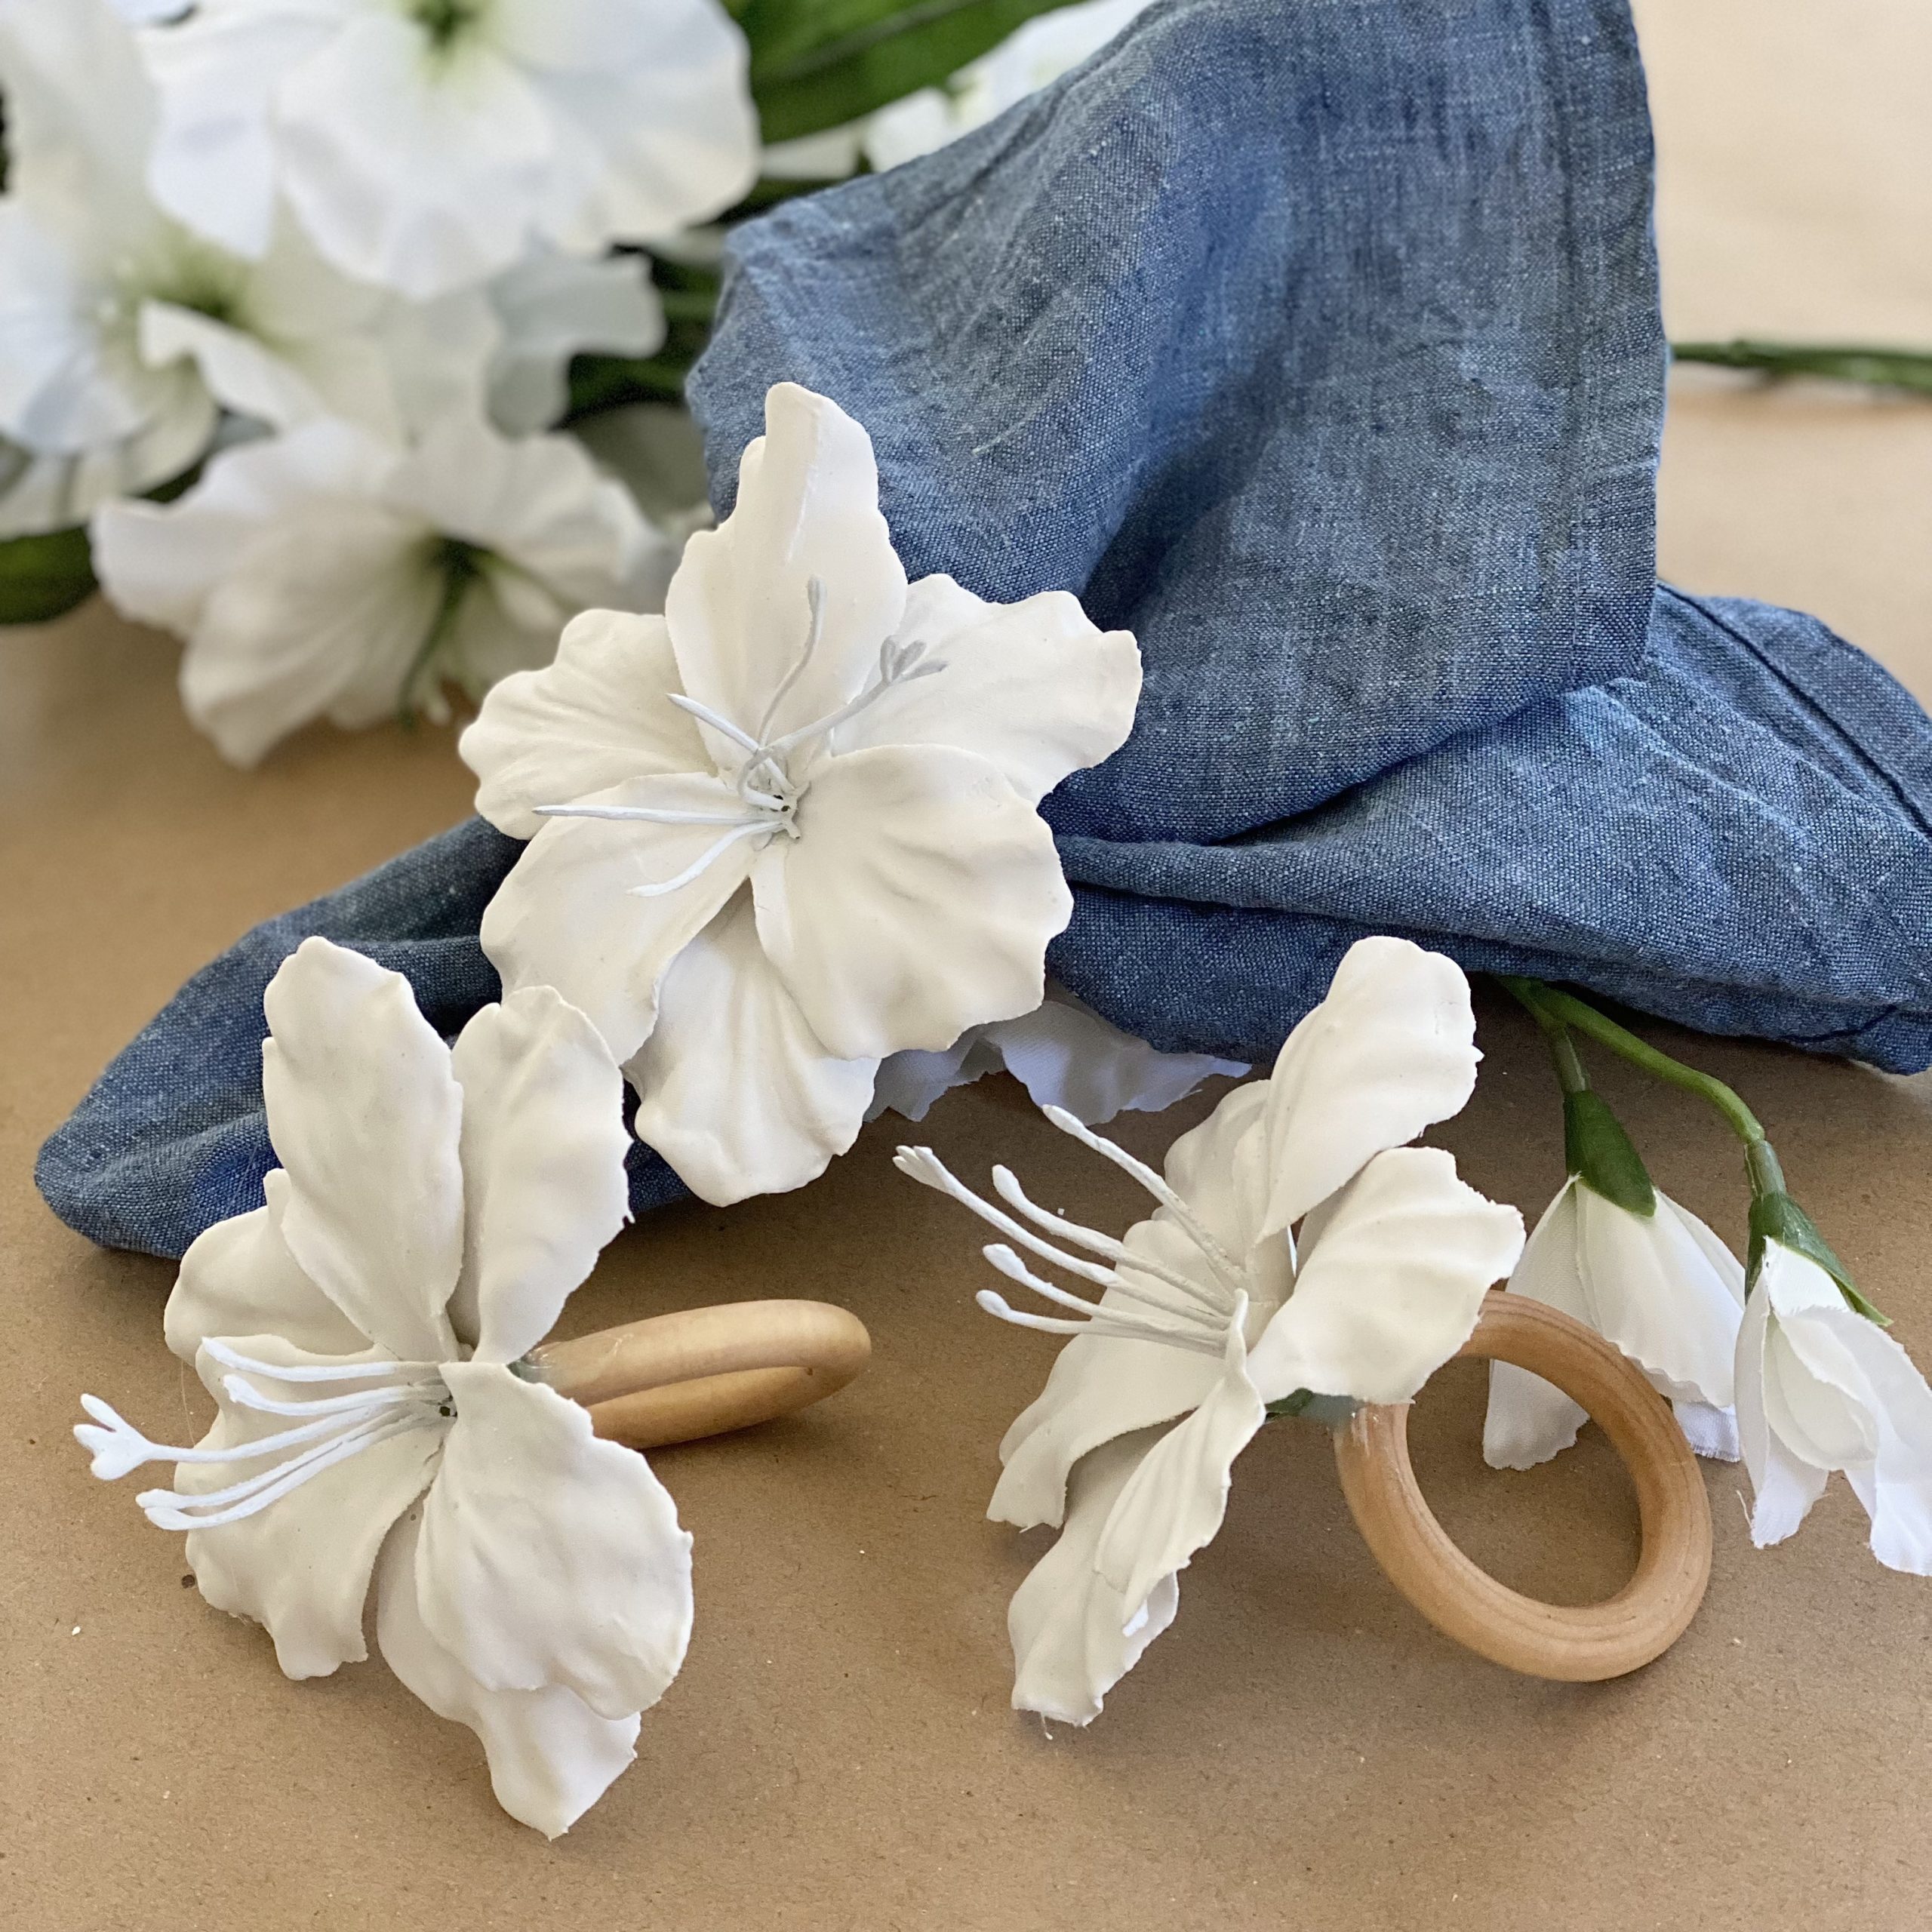 Plaster of paris floral napkin ring with a blue linen napkin in it and other napkin rings around it..